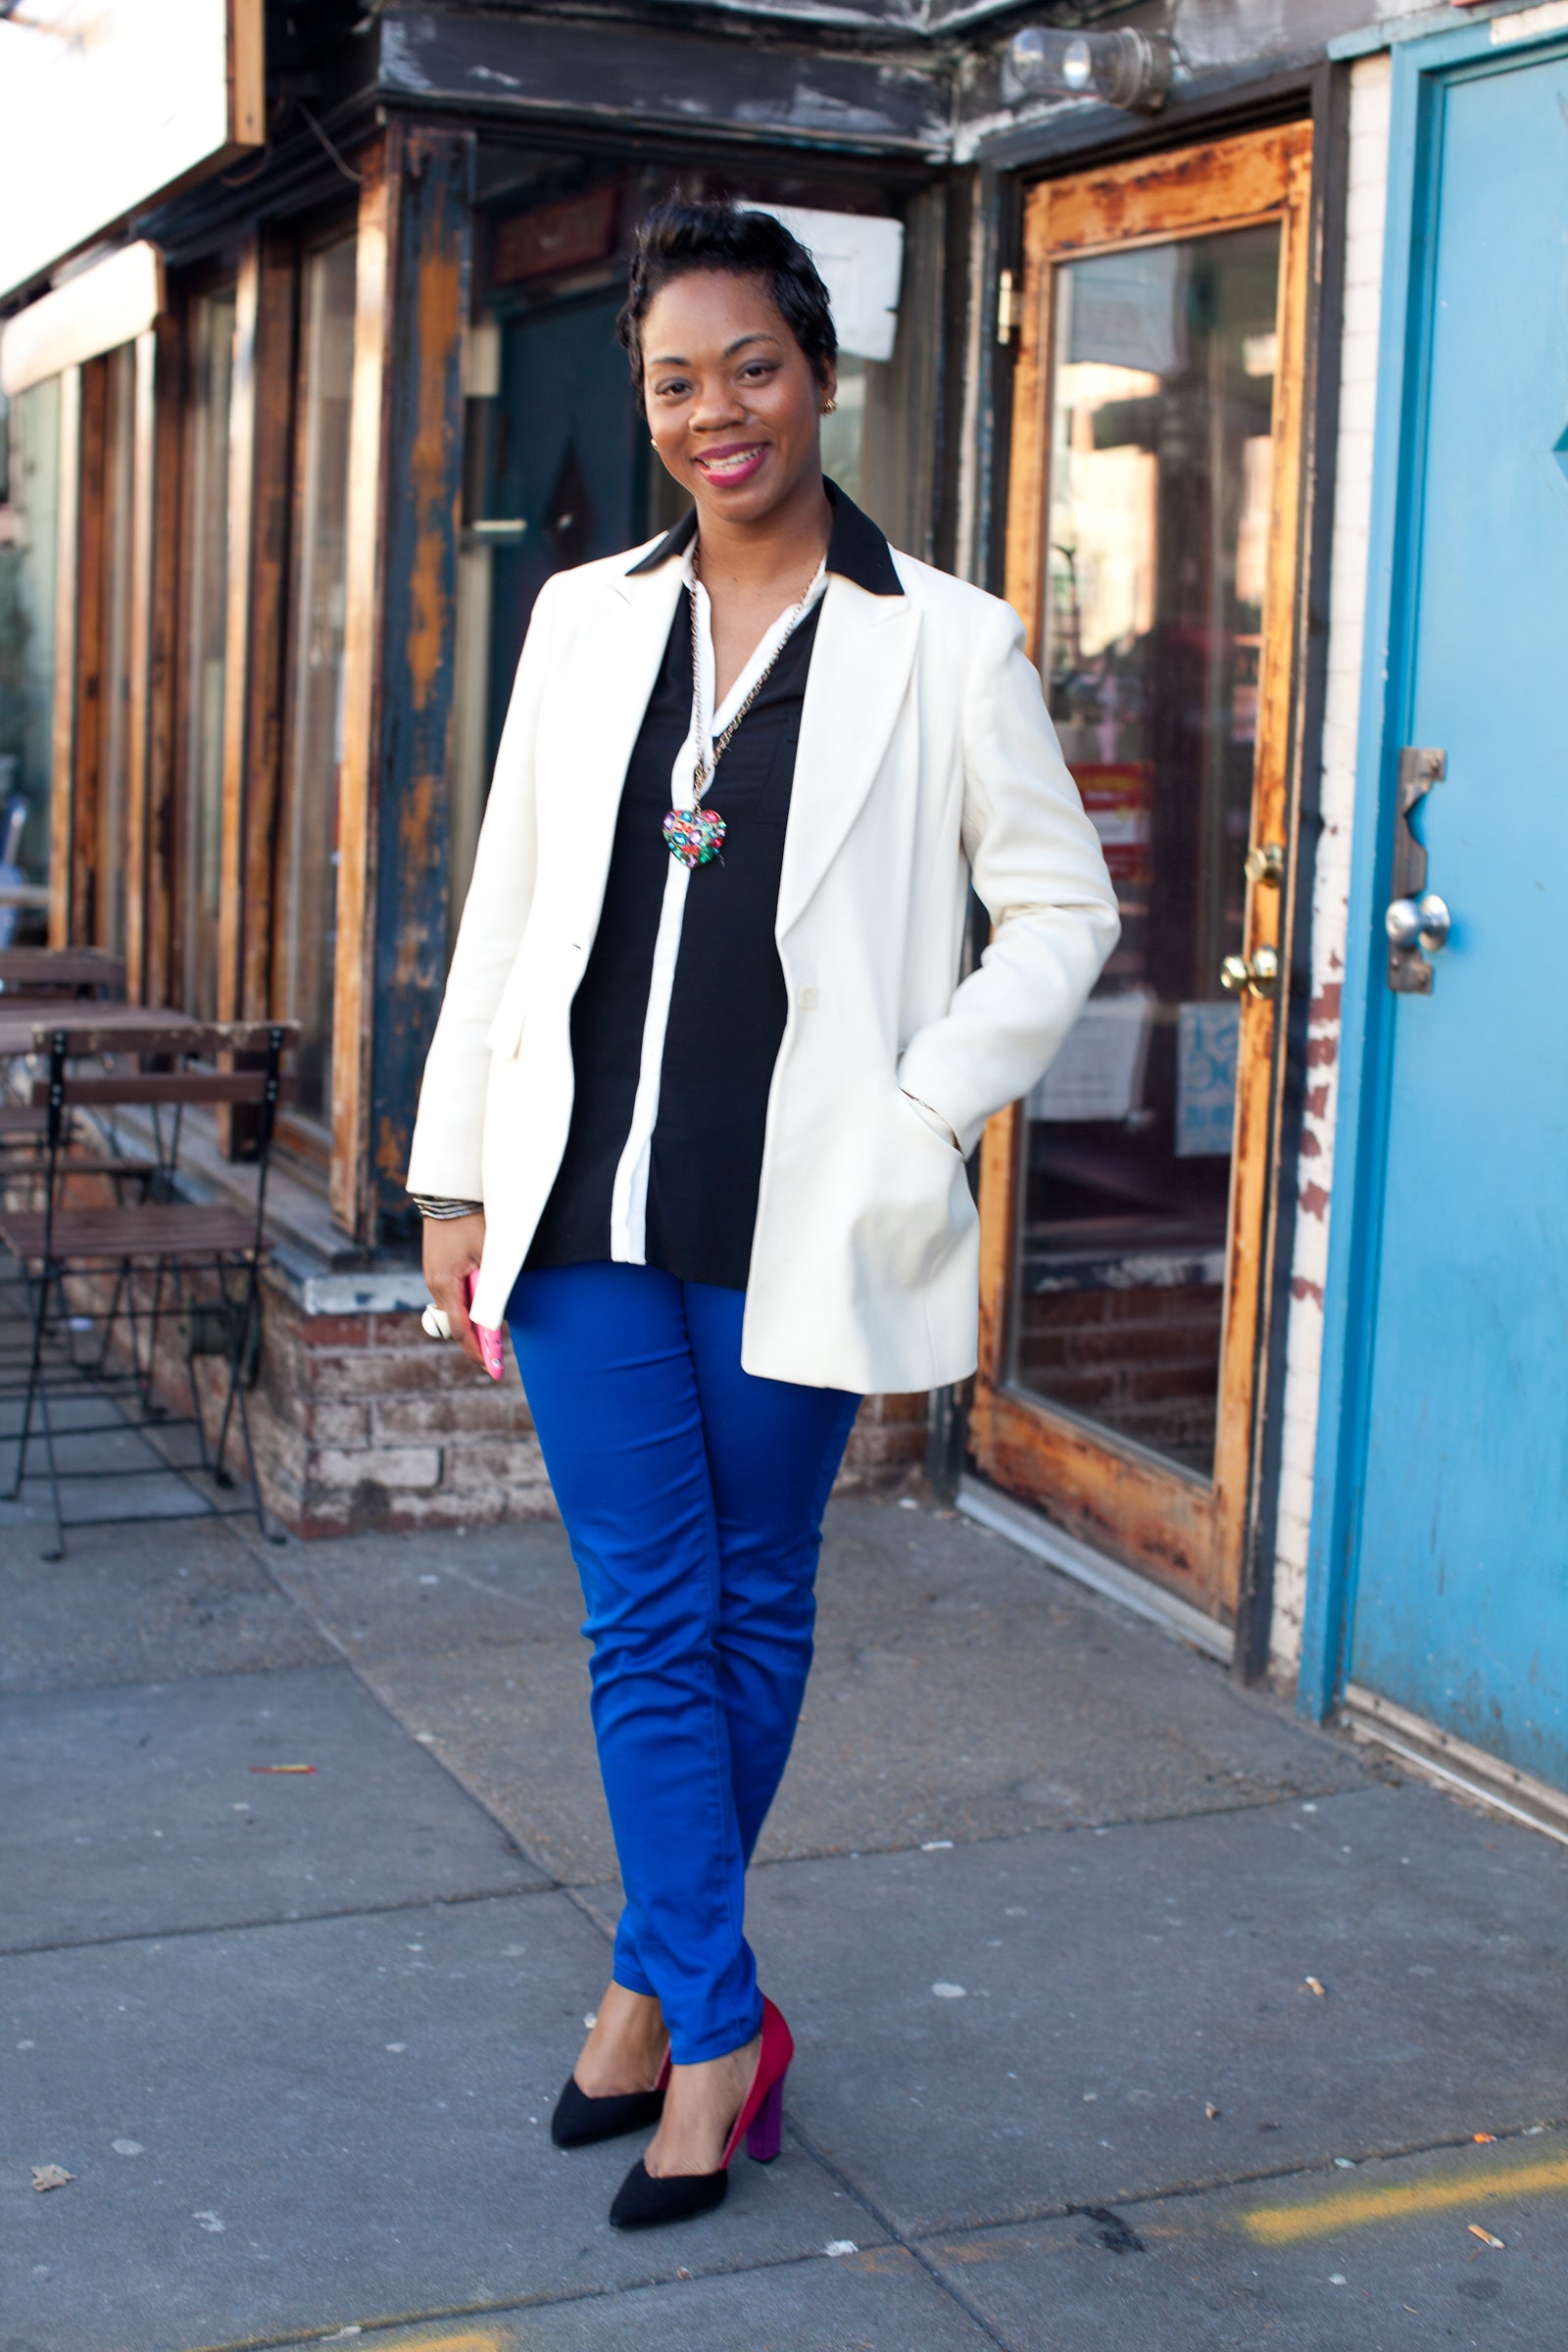 Street Style: New York to D.C.